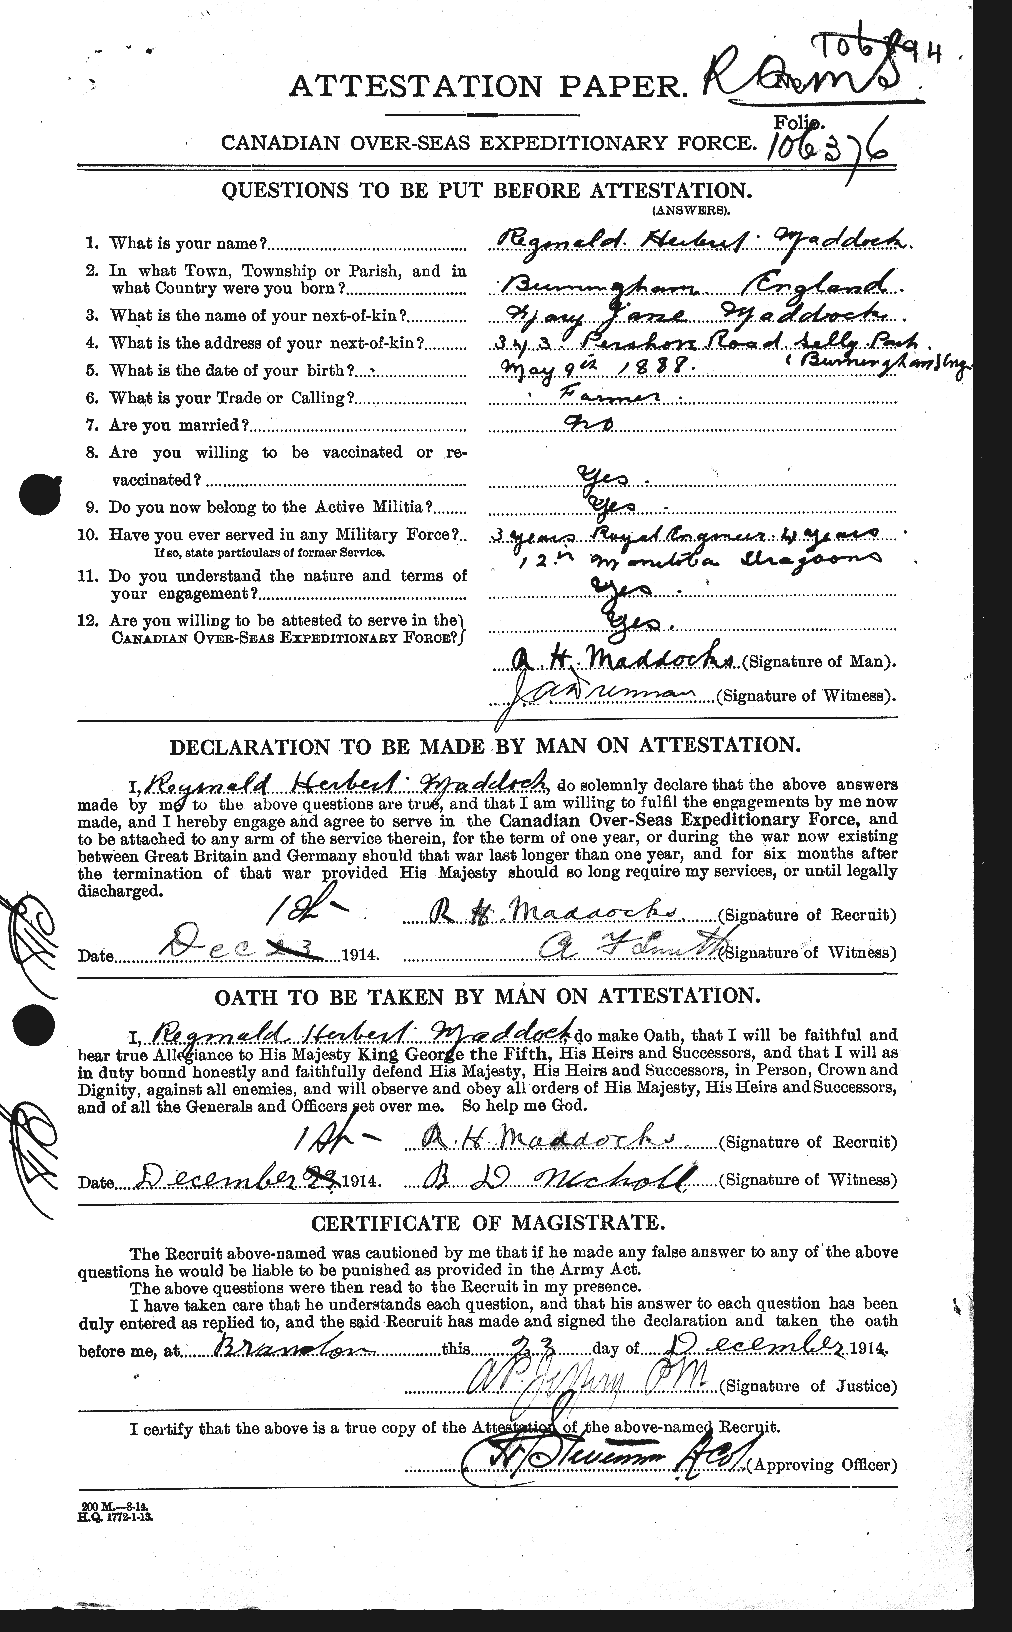 Personnel Records of the First World War - CEF 474794a